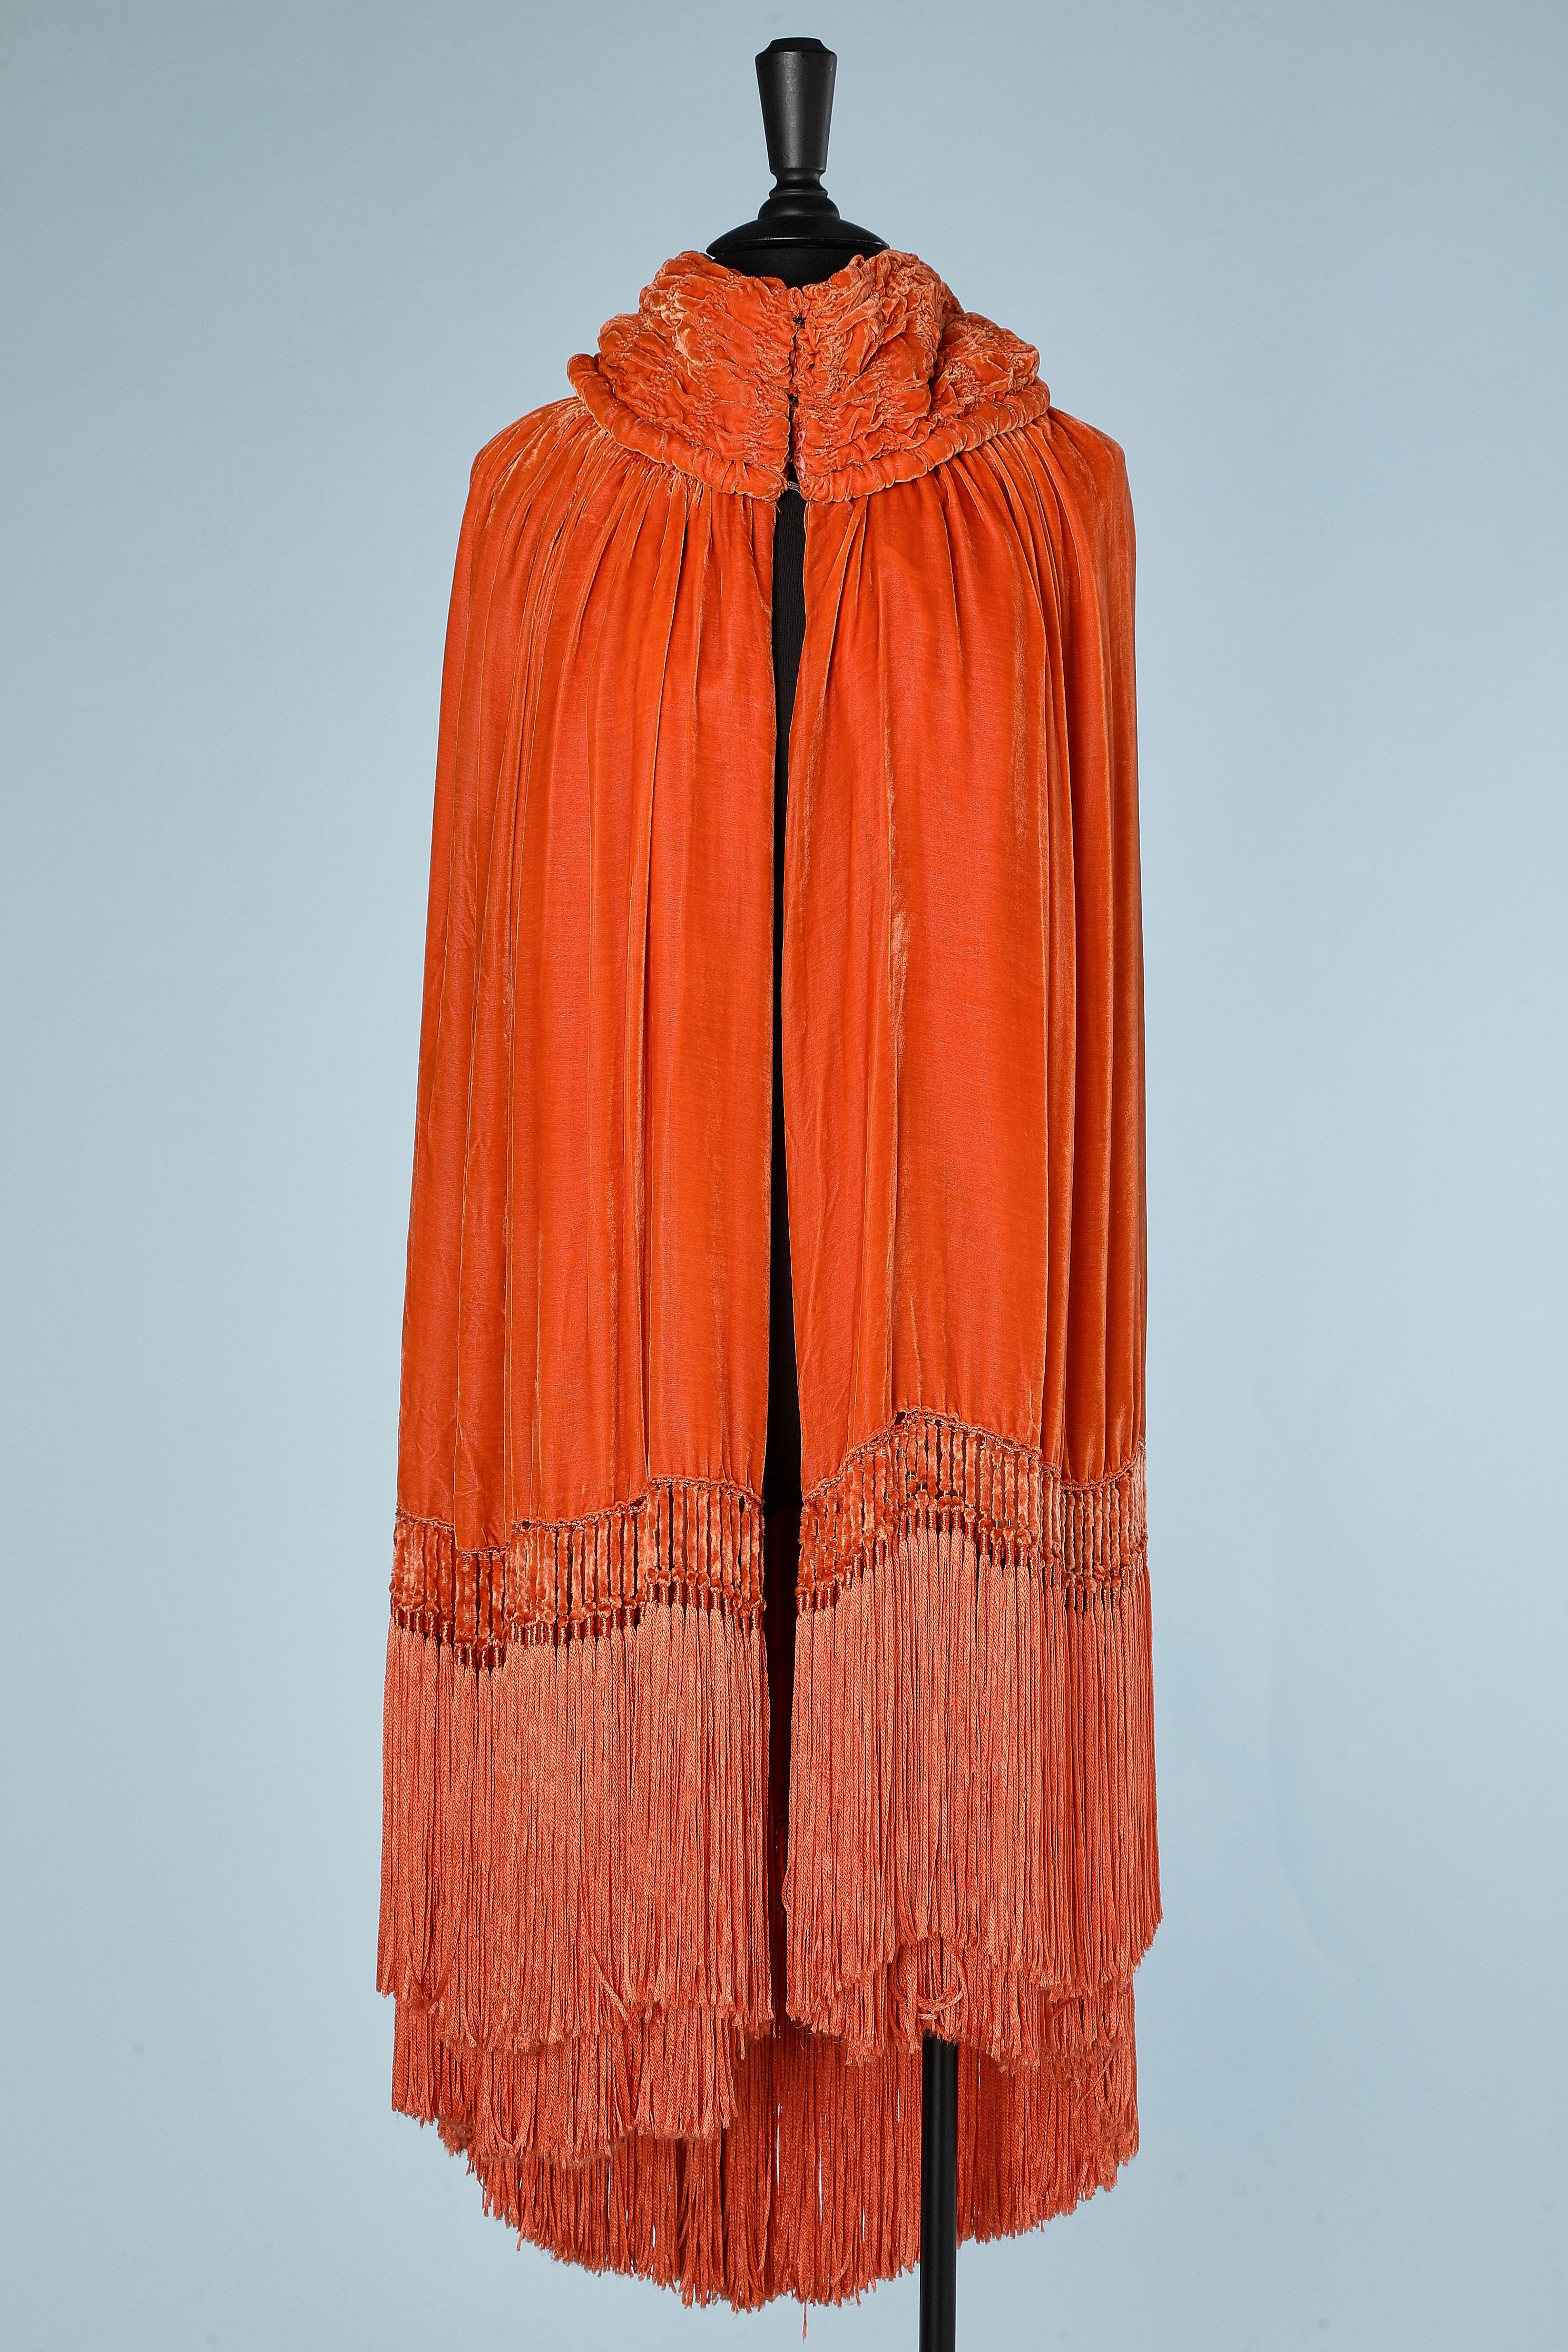 Circa 1920's Opera cape in orange silk velvet and silk &velvet fringe.
Arms opening inside the cape but hidden. Double lays of velvet and fringes in the back. The collar is fully ruffled. Orange silk lining very damaged. Sort of scarf in the middle